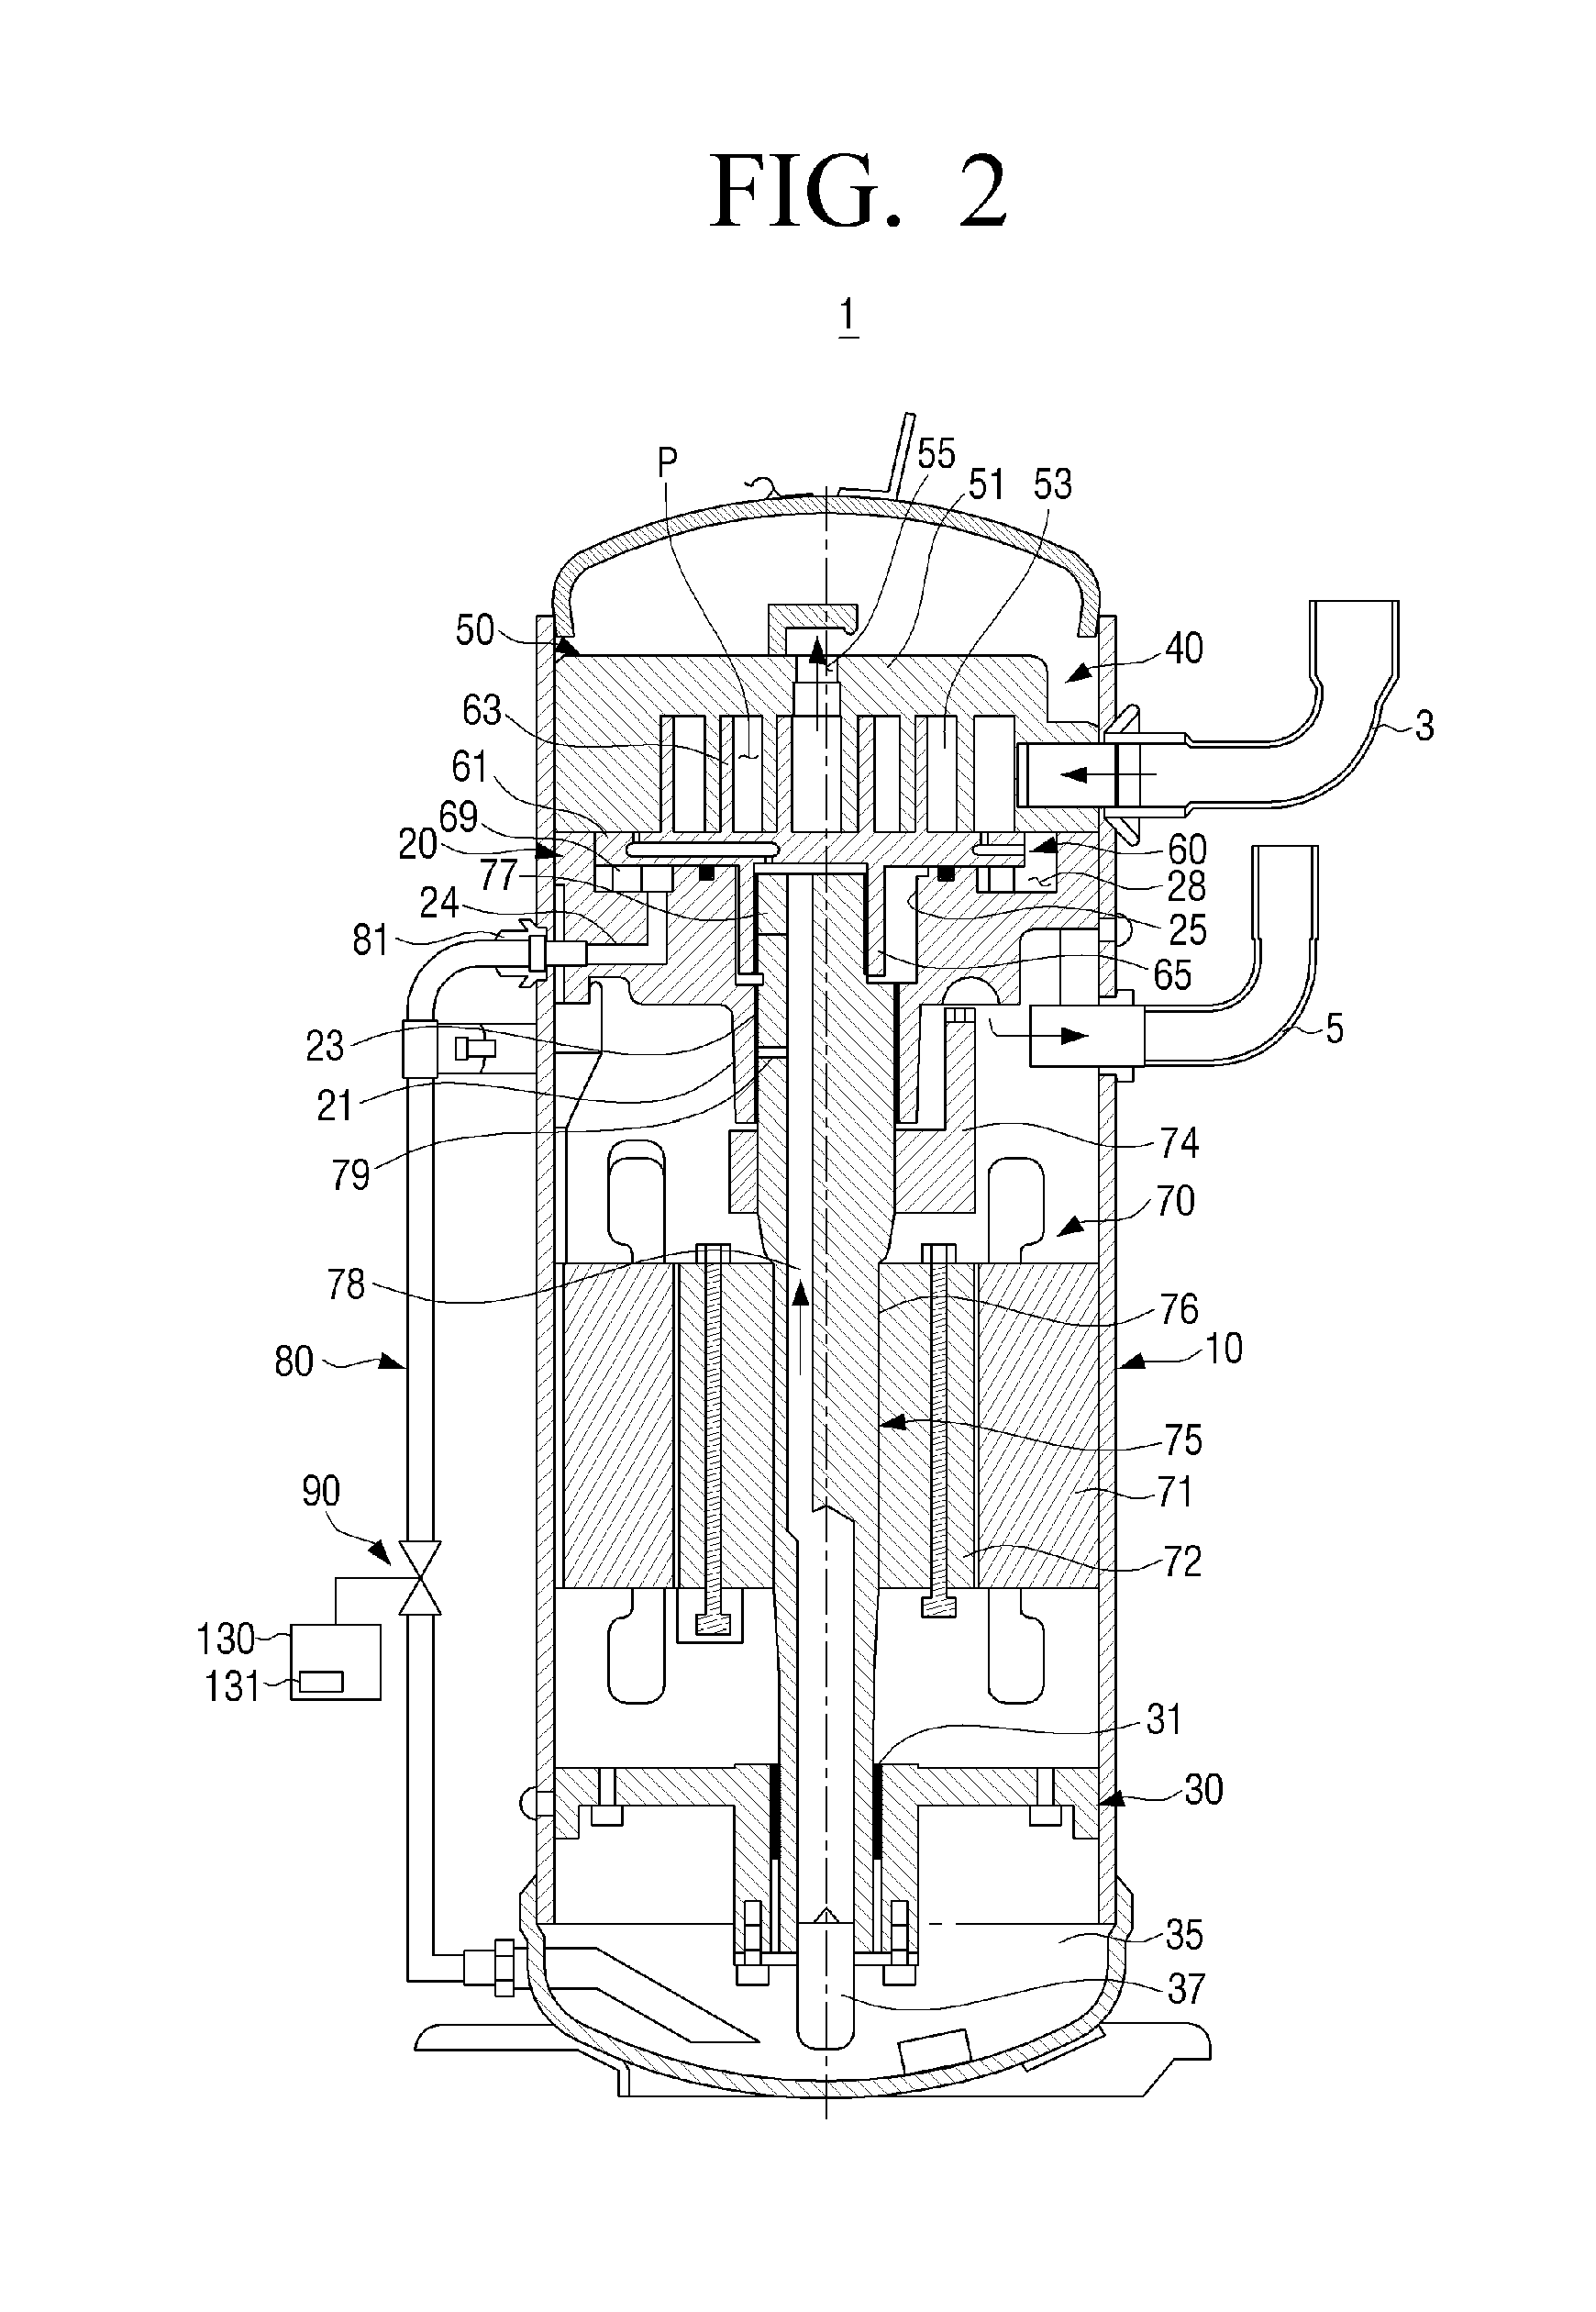 Scroll compressor and air conditioner having the same